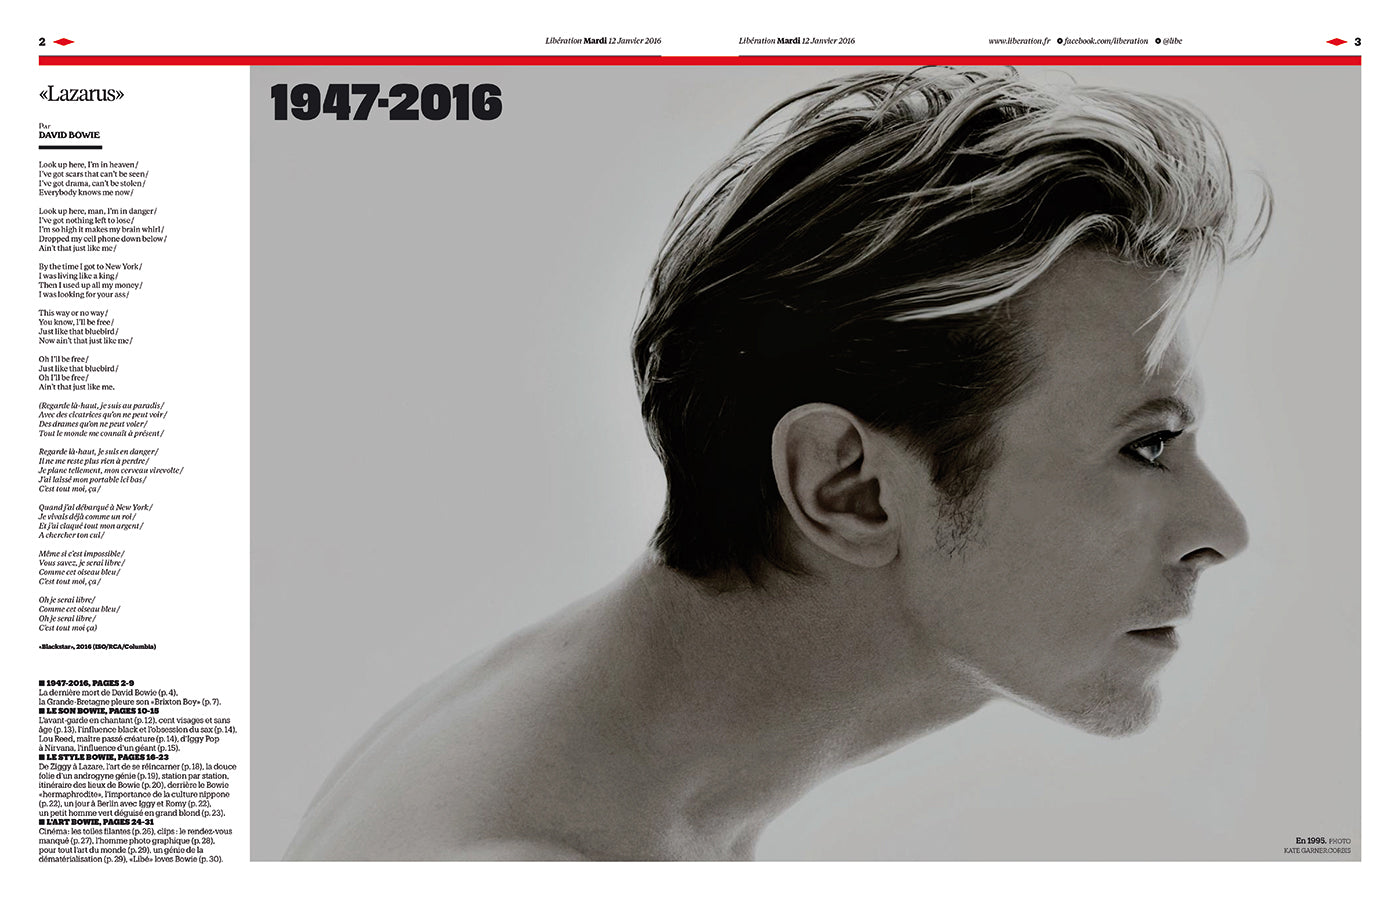 David Bowie in the French newspaper Libération on the occasion of the artist's death in 2016. (Photo: Libération)